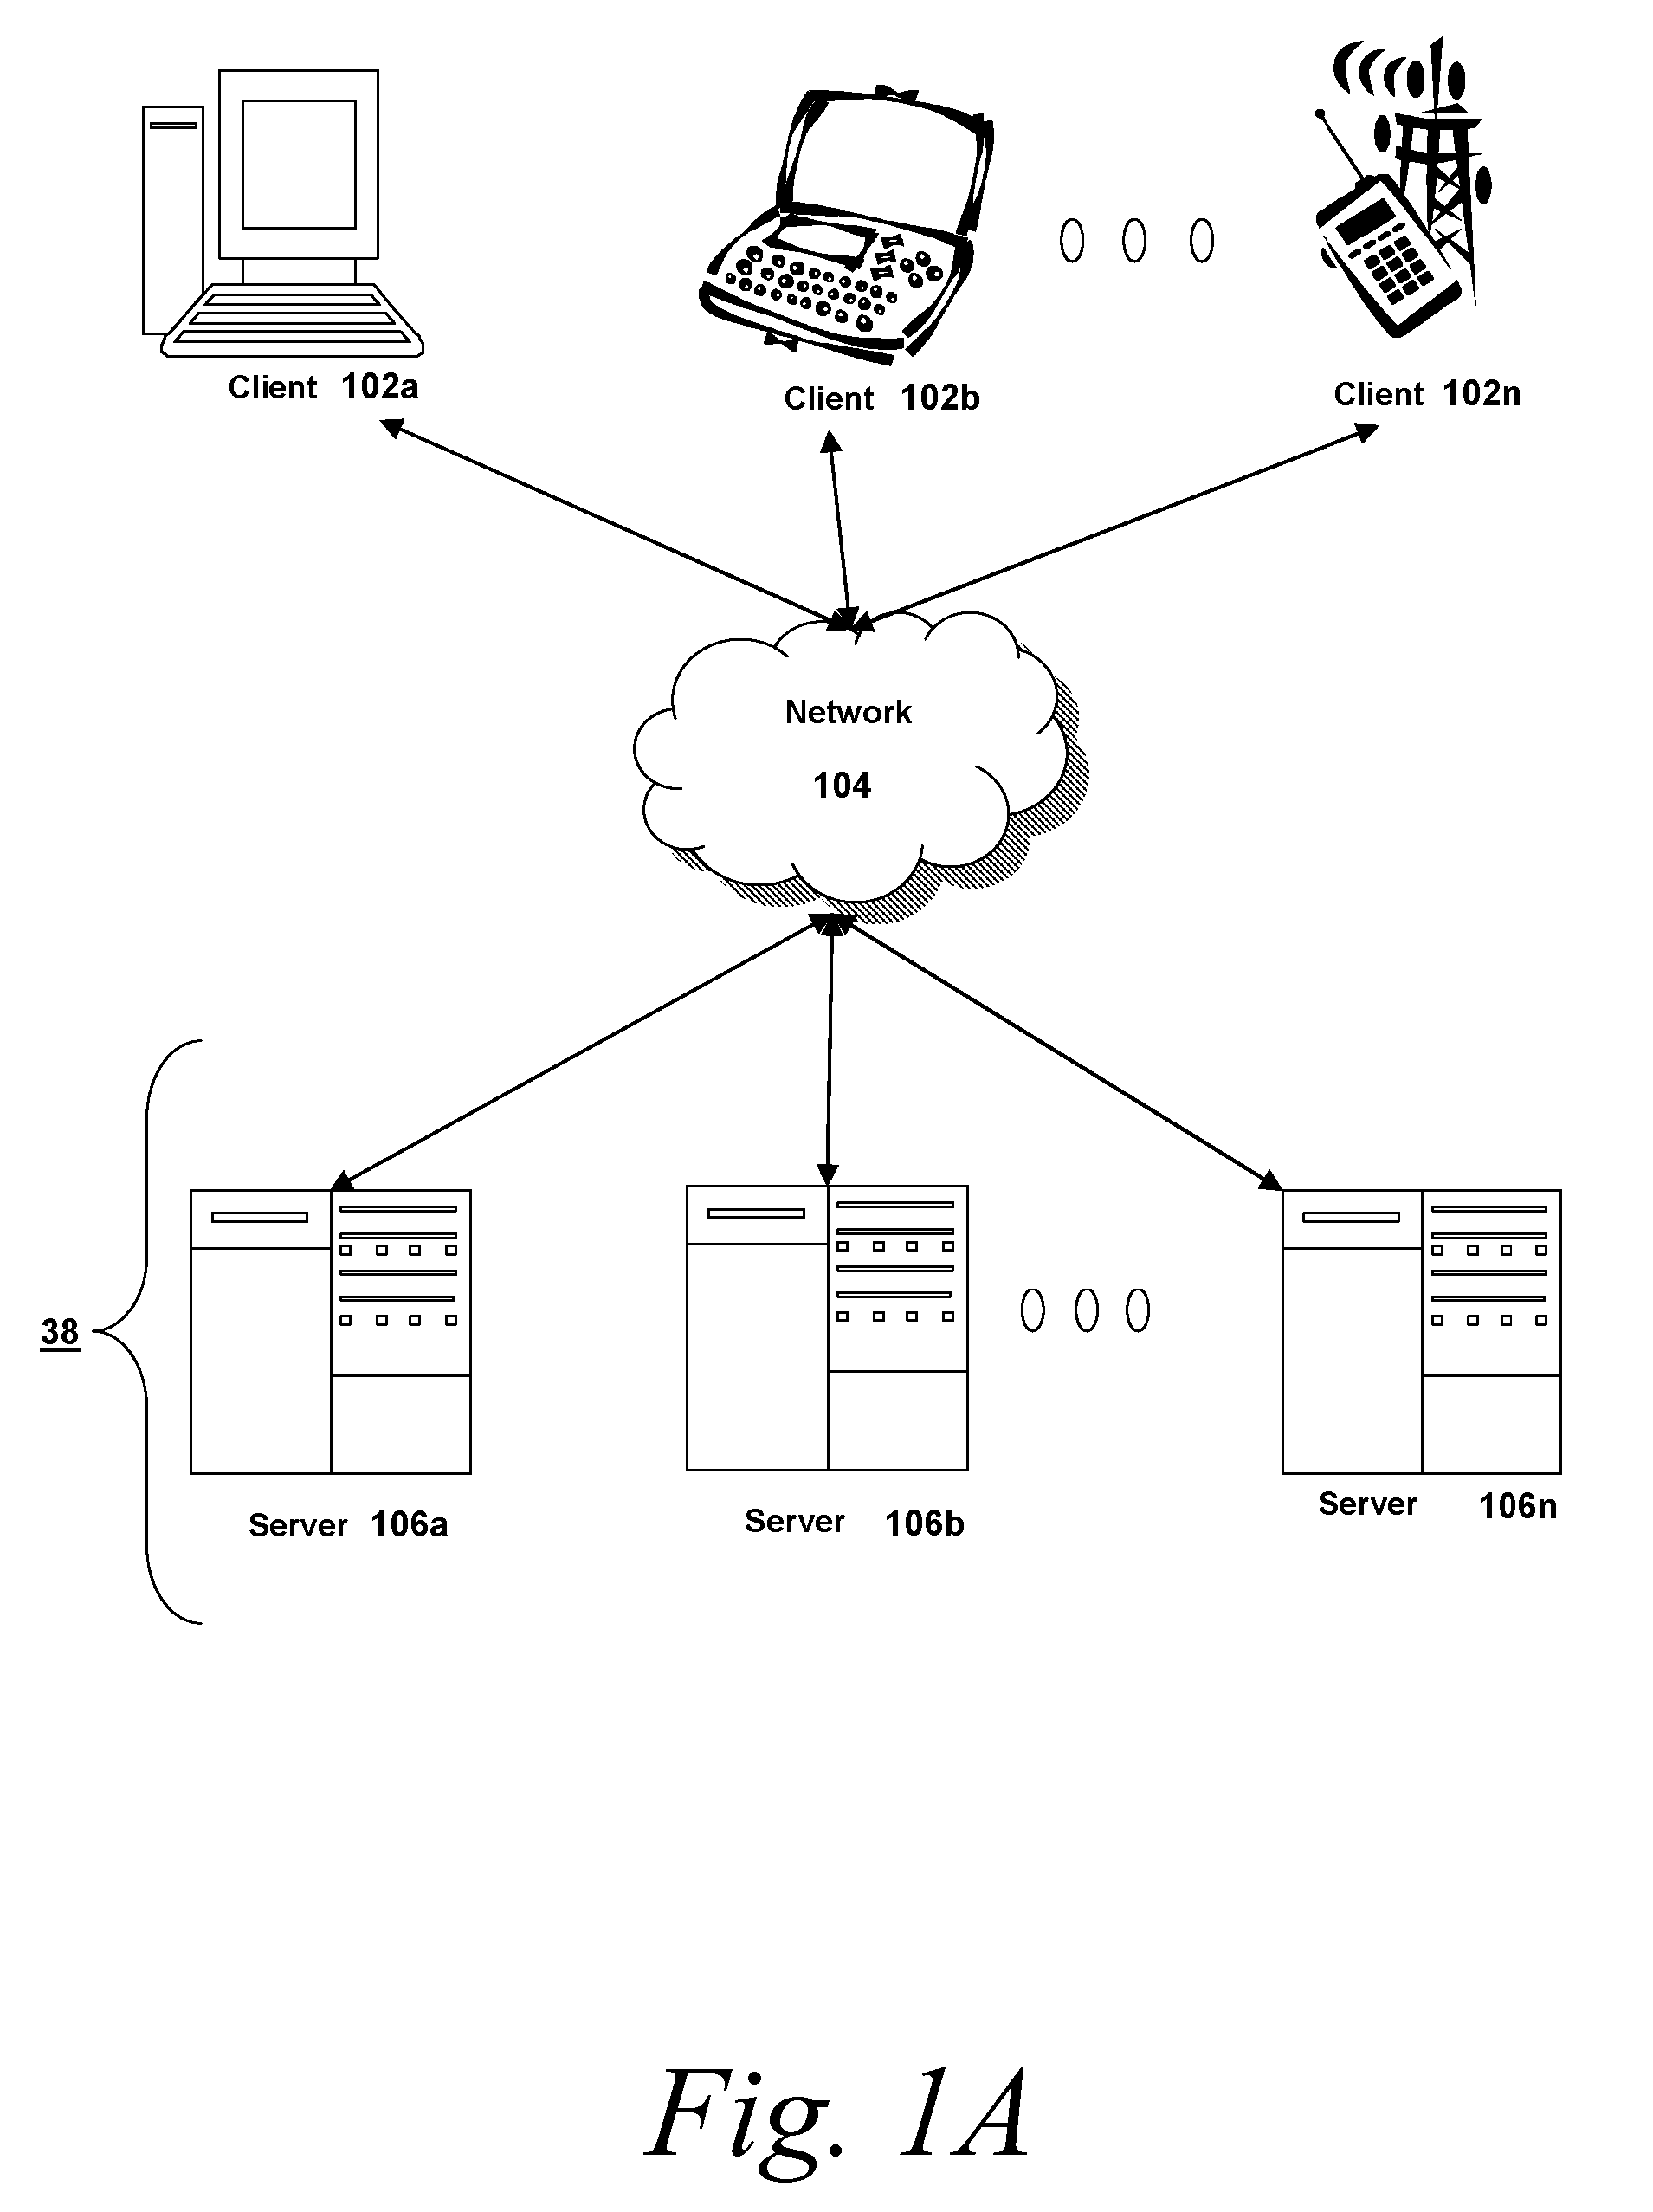 Methods and systems for recording and real-time playback of presentation layer protocol data